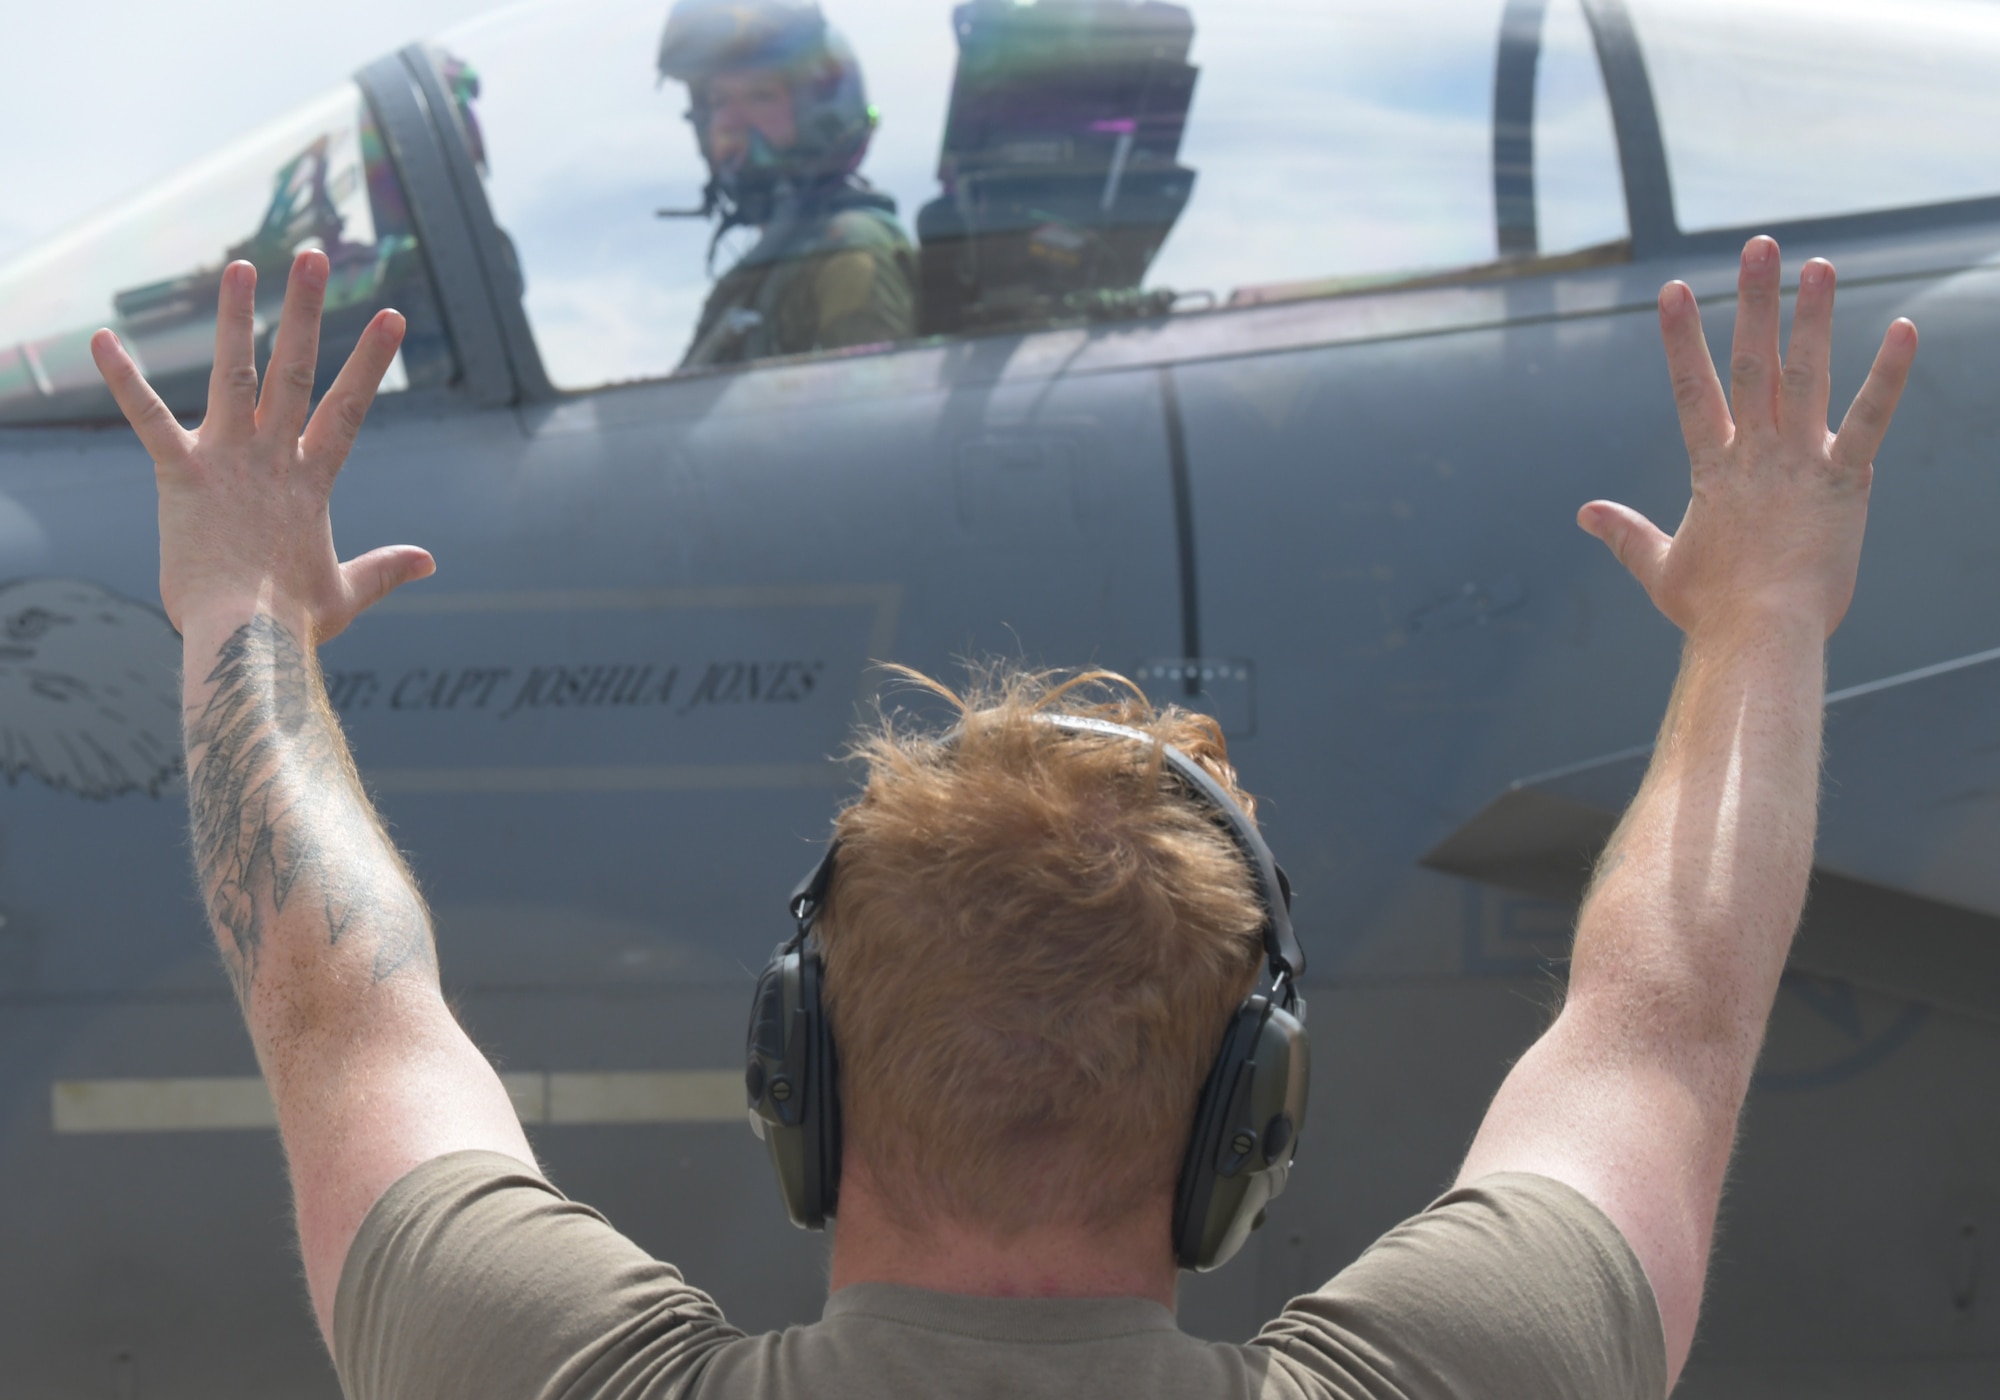 U.S. Air Force Senior Airman Brian Jankowski, 748th Aircraft Maintenance Squadron crew chief, marshals an F-15C Eagle assigned to the 493rd Fighter Squadron during exercise Astral Knight 21 at Larissa Air Base, Greece, May 20, 2021. The 48th Fighter Wing deployed 12 F-15C/D Eagles and more than 250 Airmen from the 493rd FS, 748th AMXS and other supporting units to participate in the exercise. (U.S. Air Force photo by Tech. Sgt. Alex Fox Echols III)